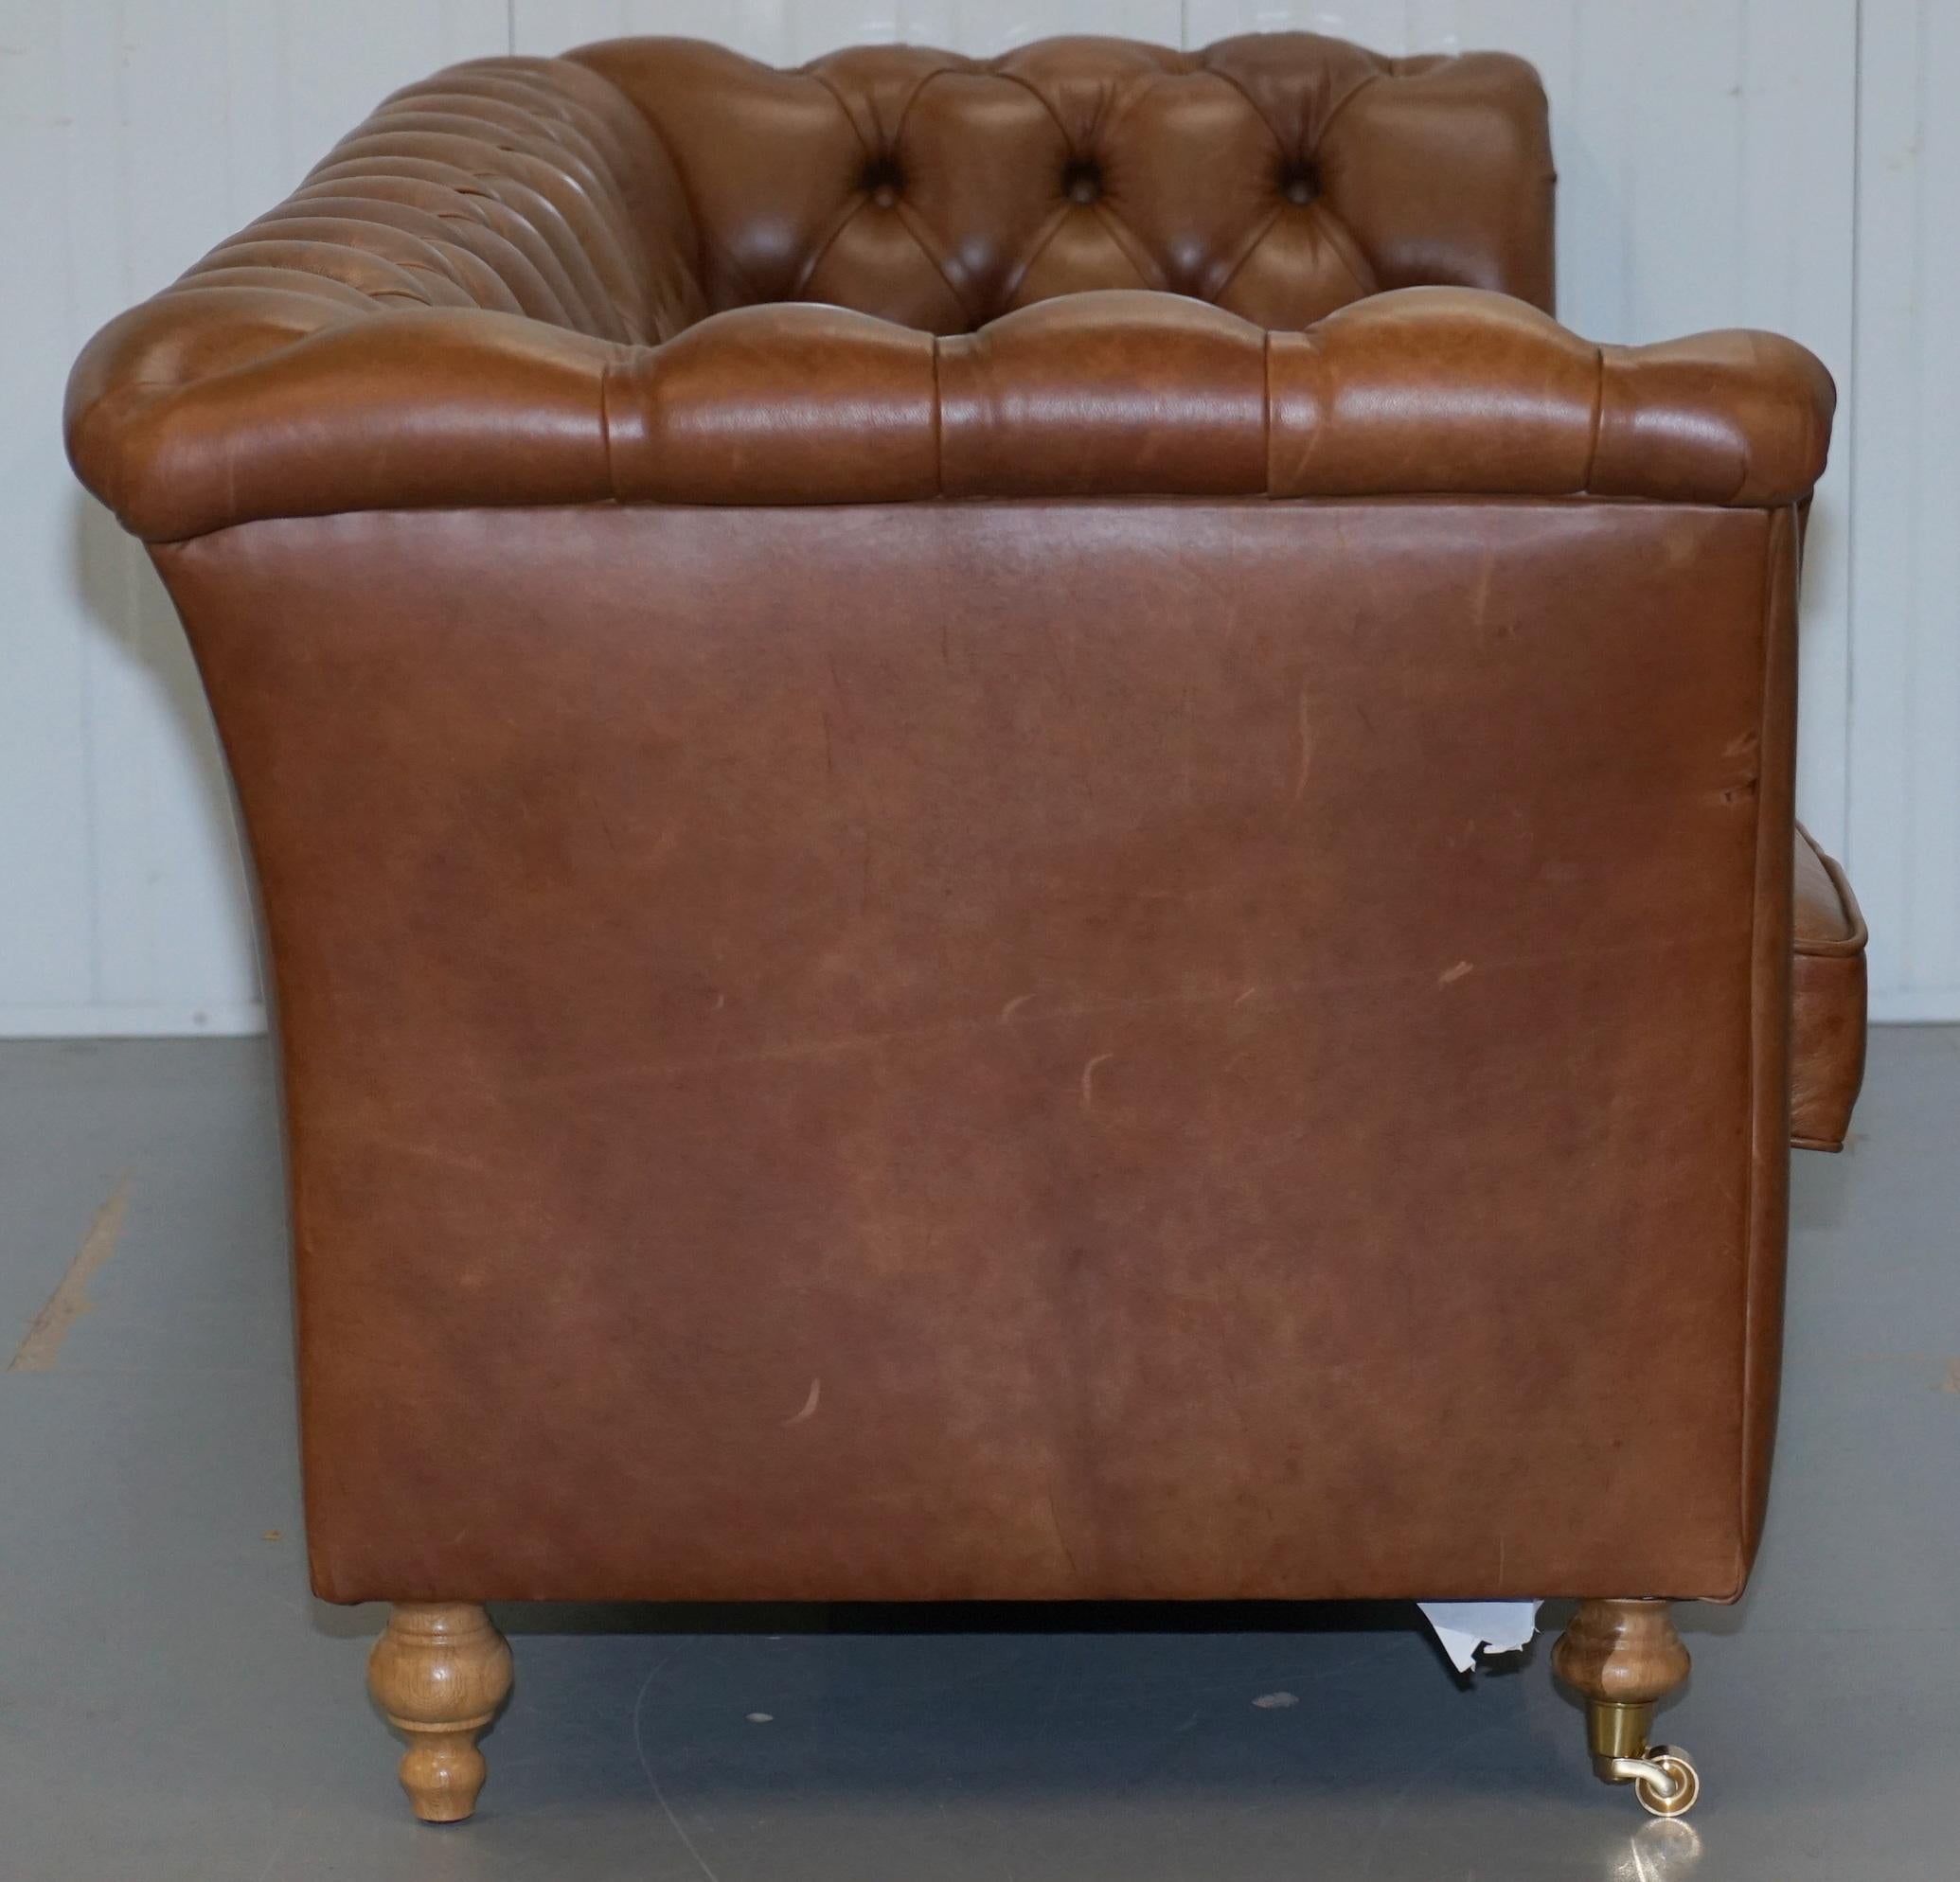 Chestnut Brown Leather Chesterfield Sofa with Turned Oak Legs and Castors 7